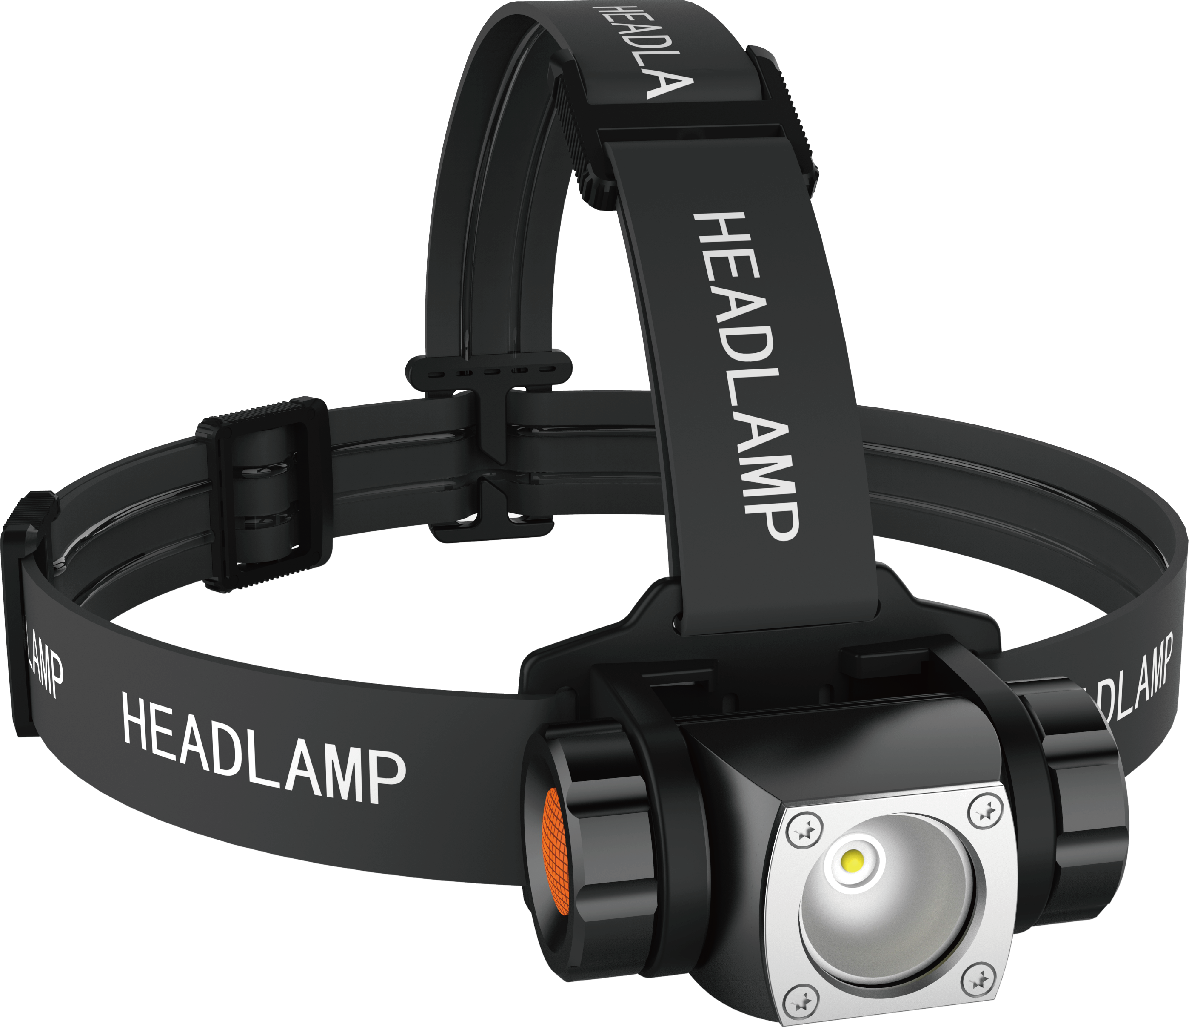 Recommendations and precautions for the use of Headlamp